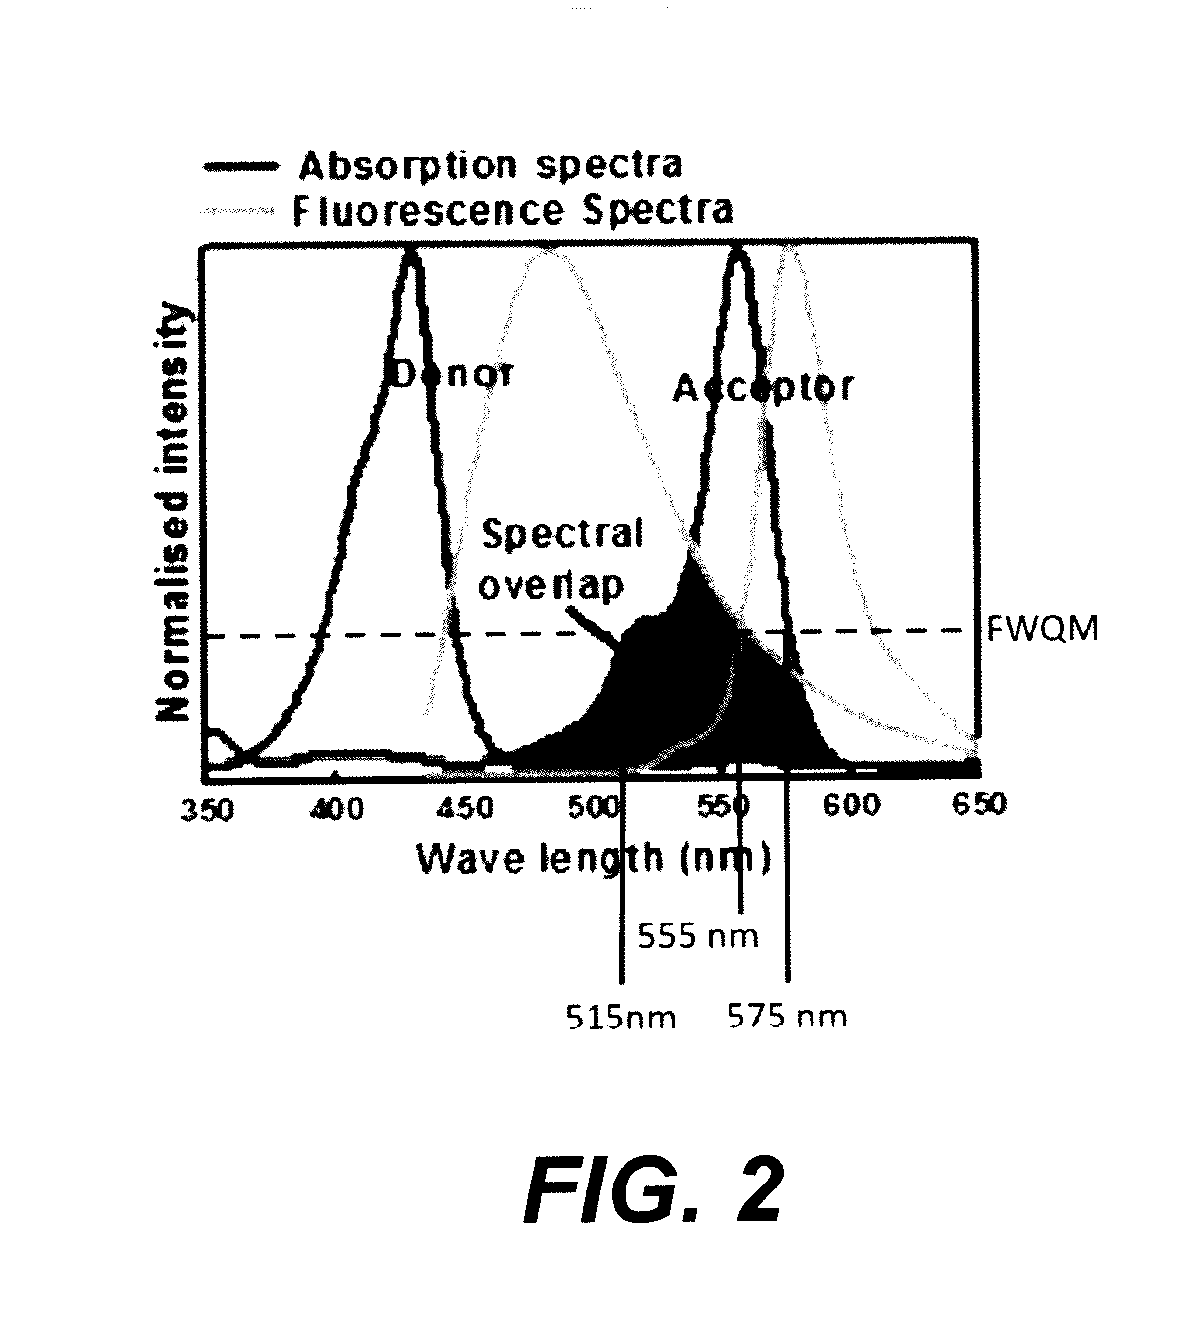 Biophotonic compositions for treating skin and soft tissue wounds having either or both non-resistant and resistant infections